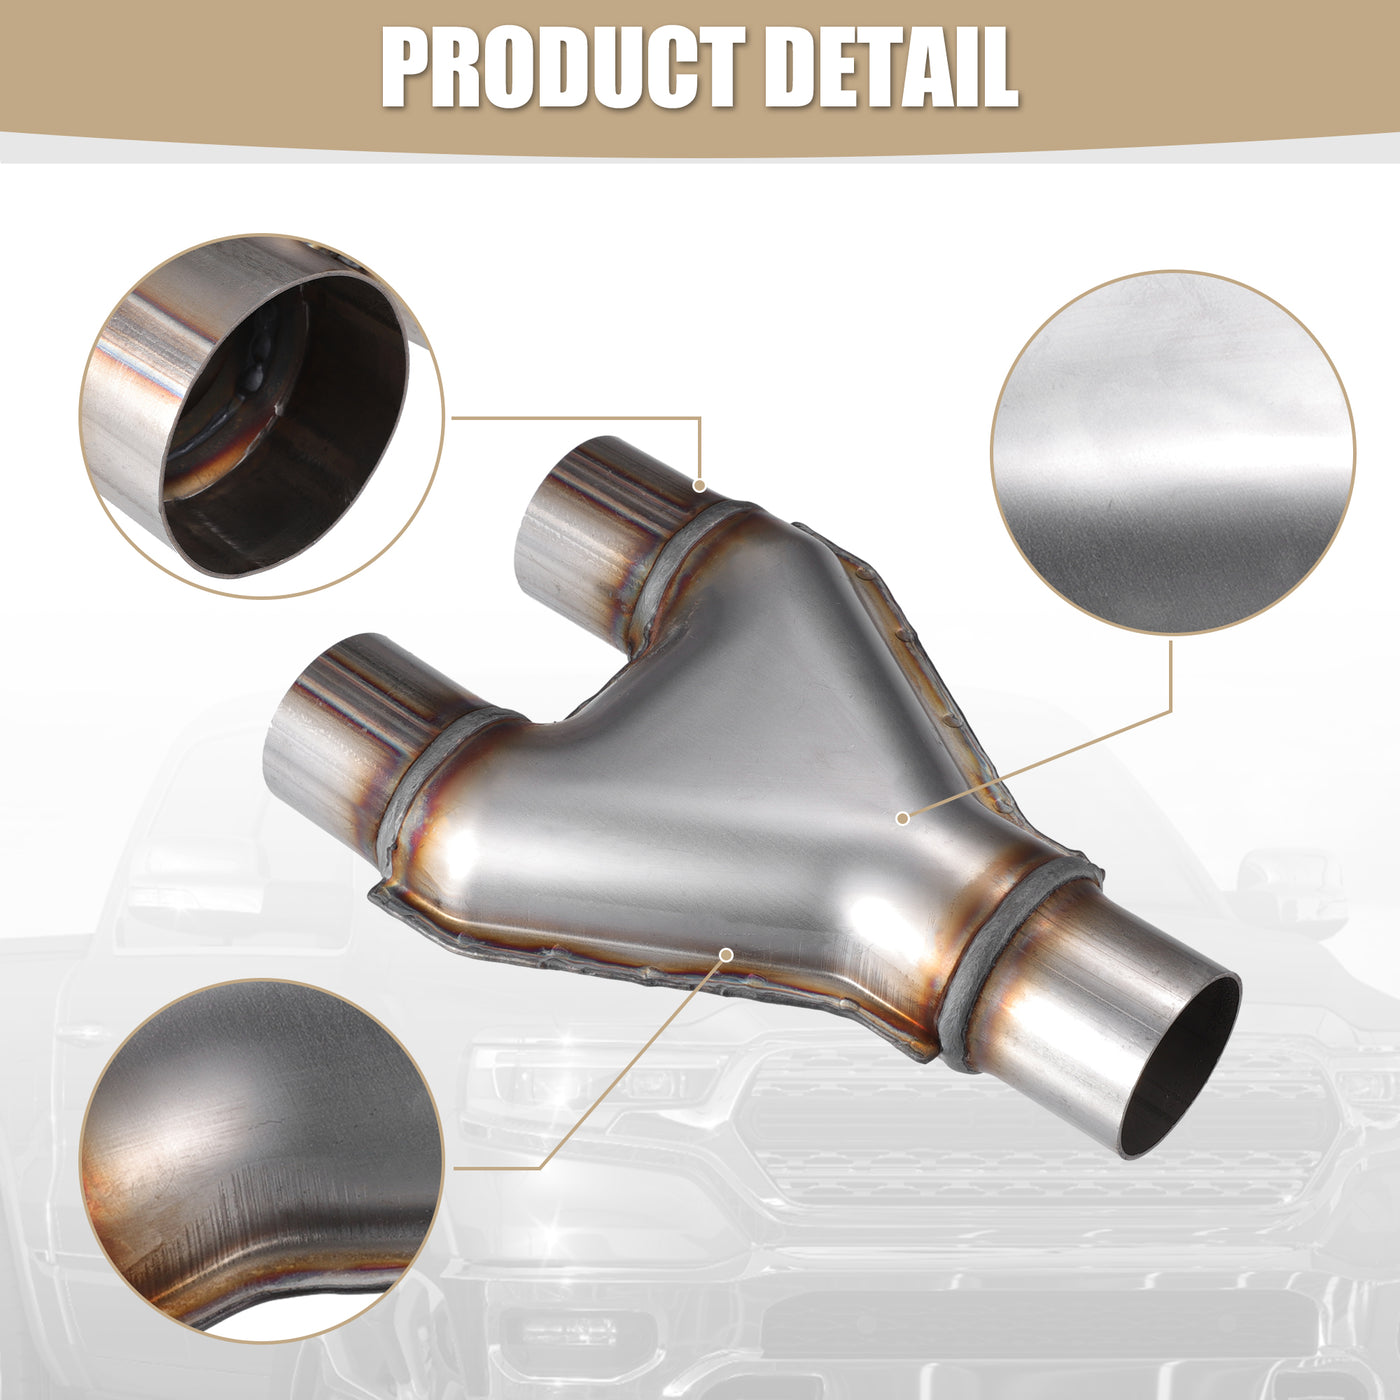 X AUTOHAUX Universal 409 Stainless Steel Exhaust Y Pipe 2" Single to 2" Dual Exhaust Adapter Connector 10" Overall Length for Car Truck